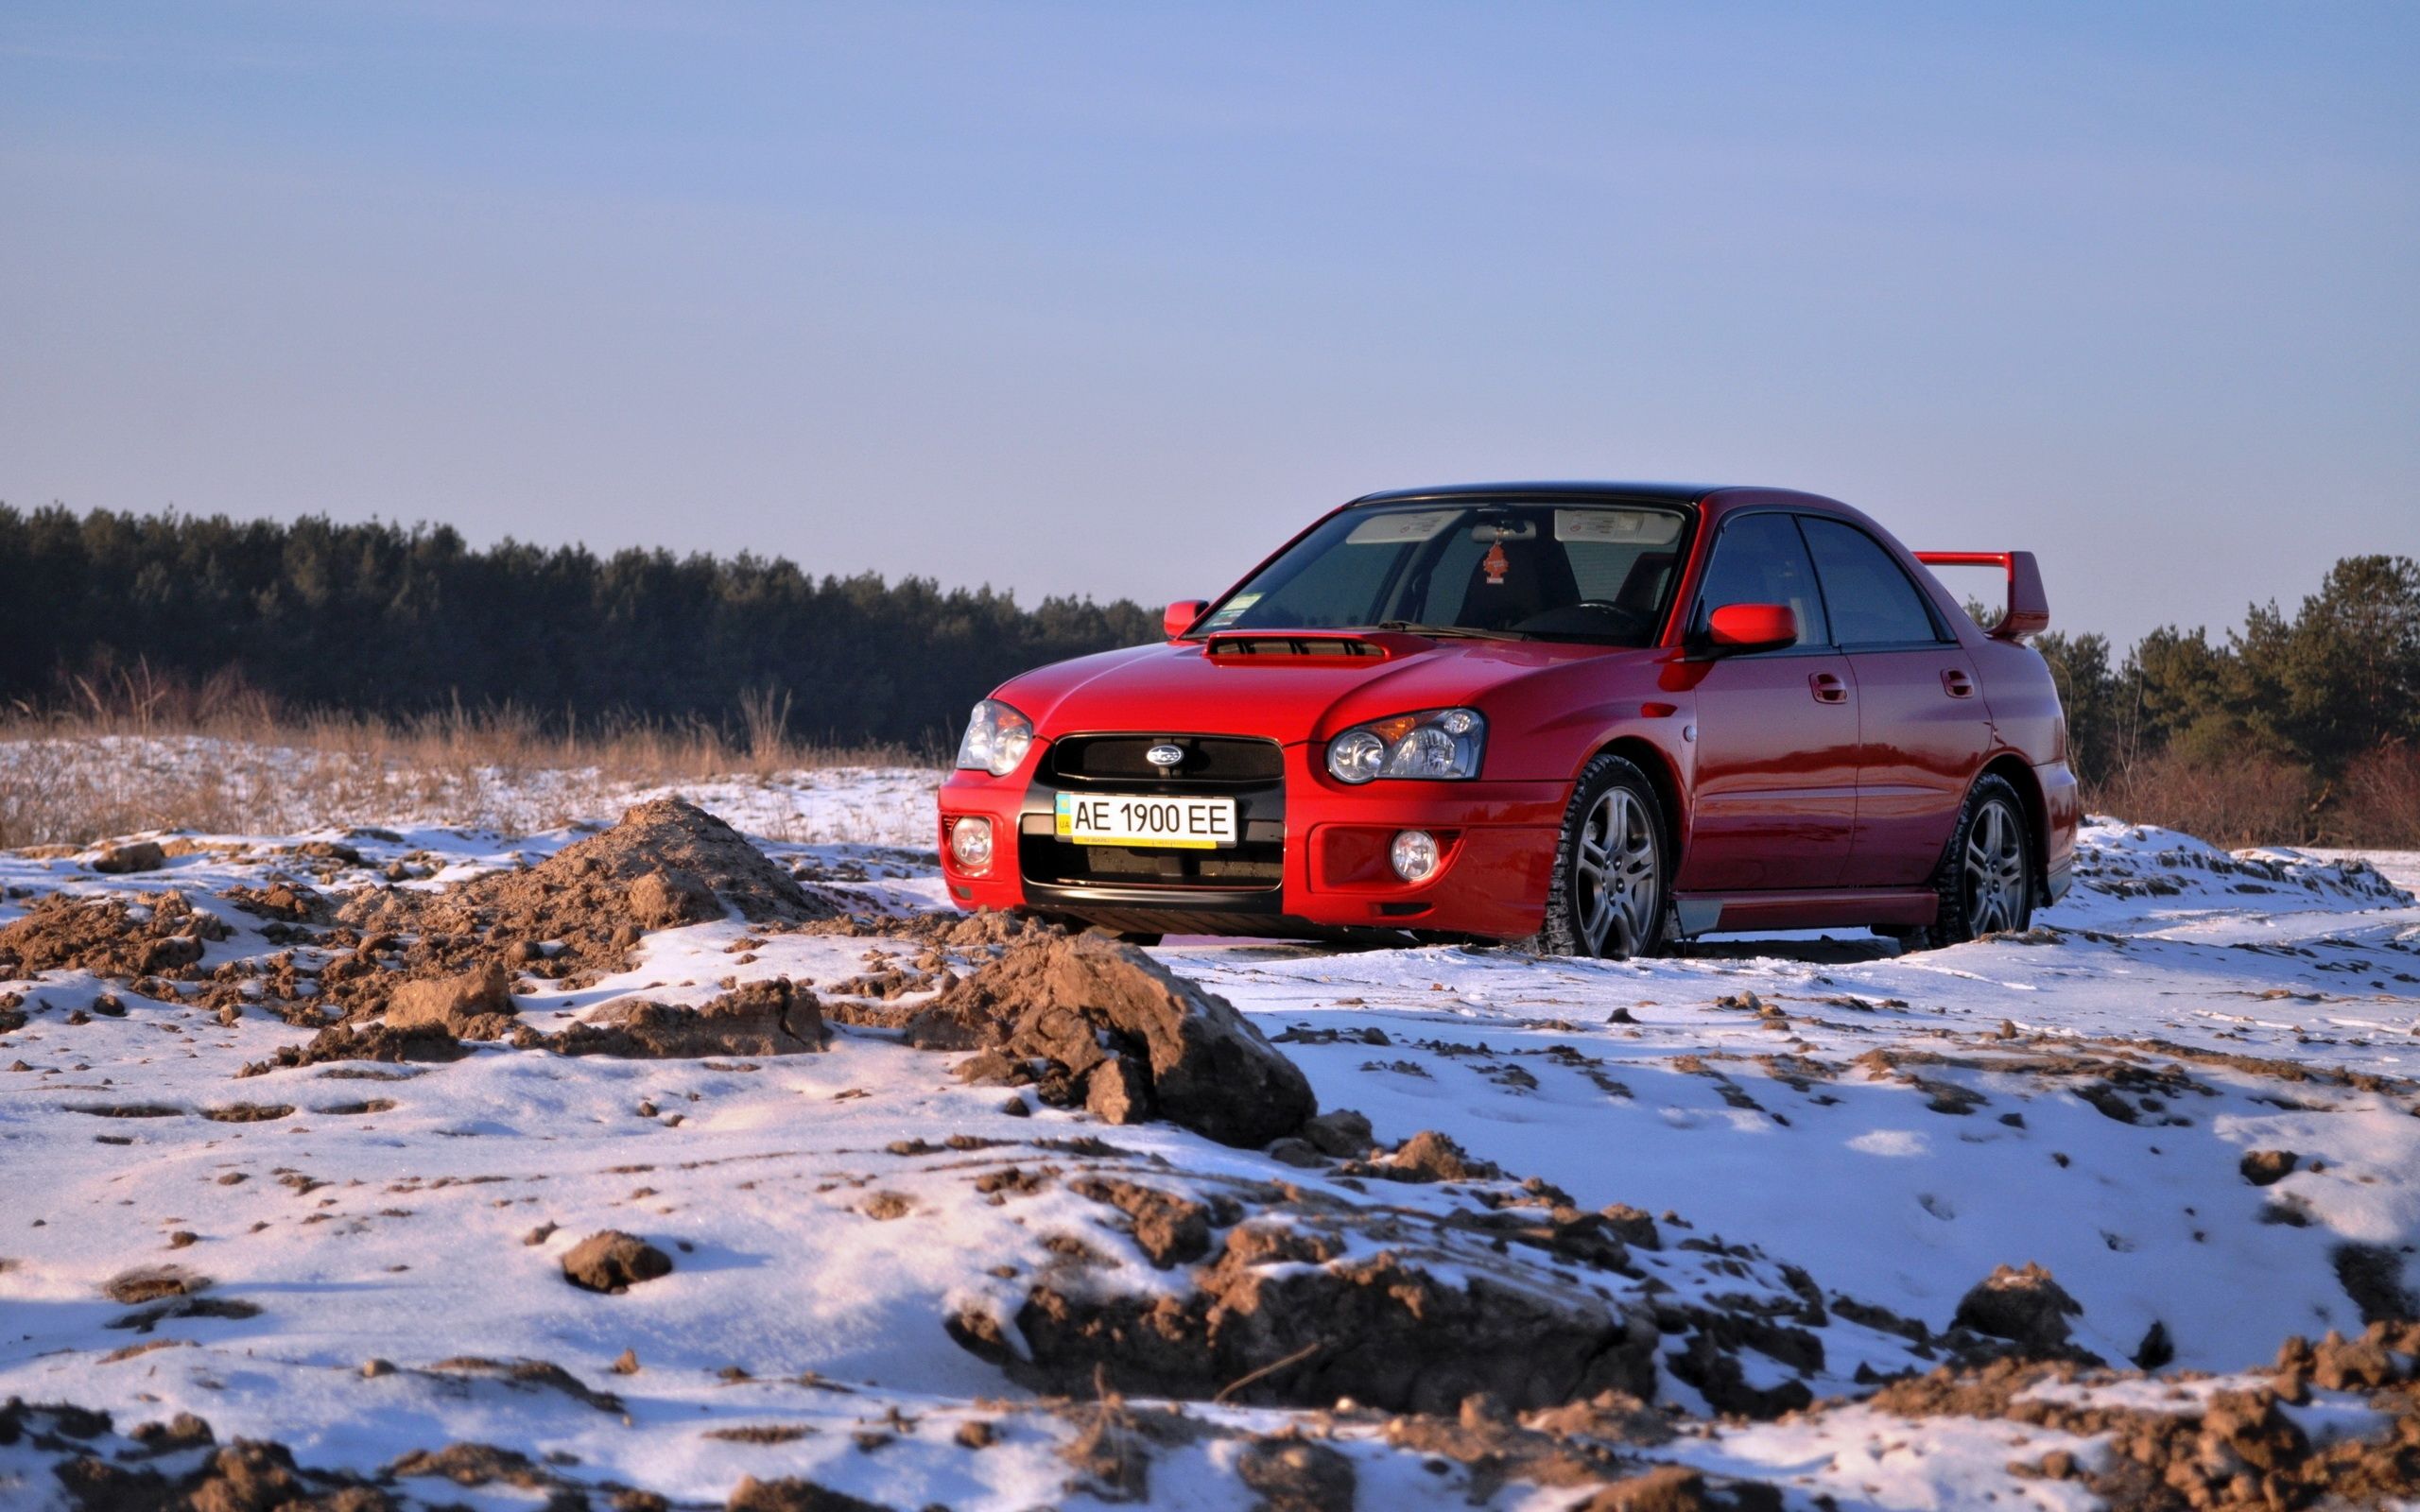 Subaru Impreza WRX wallpapers and images - wallpapers, pictures ...